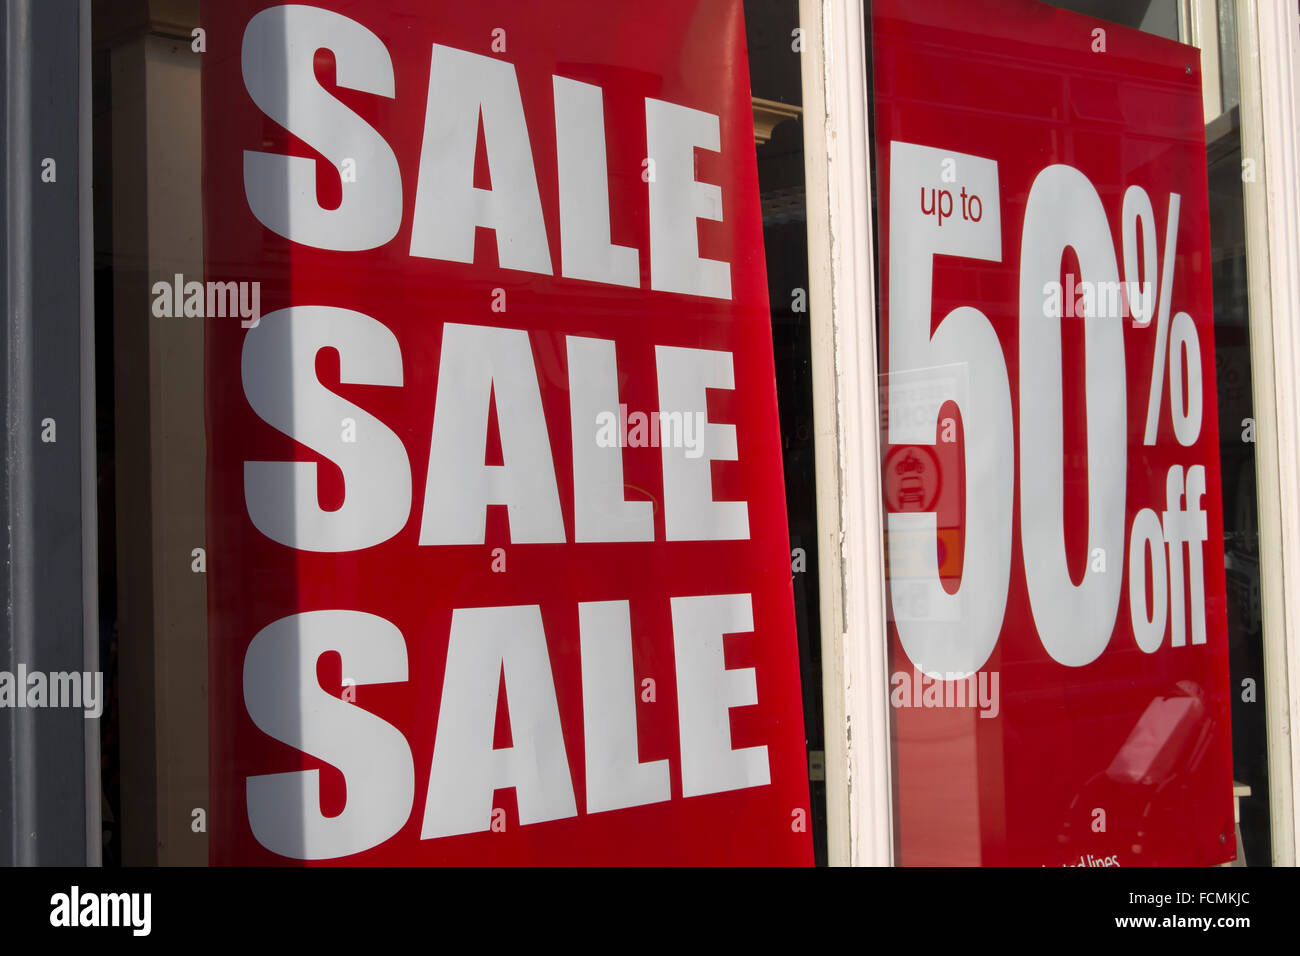 sale and up to 50 percent off sign in shop window in kingston upon thames, surrey, england Stock Photo